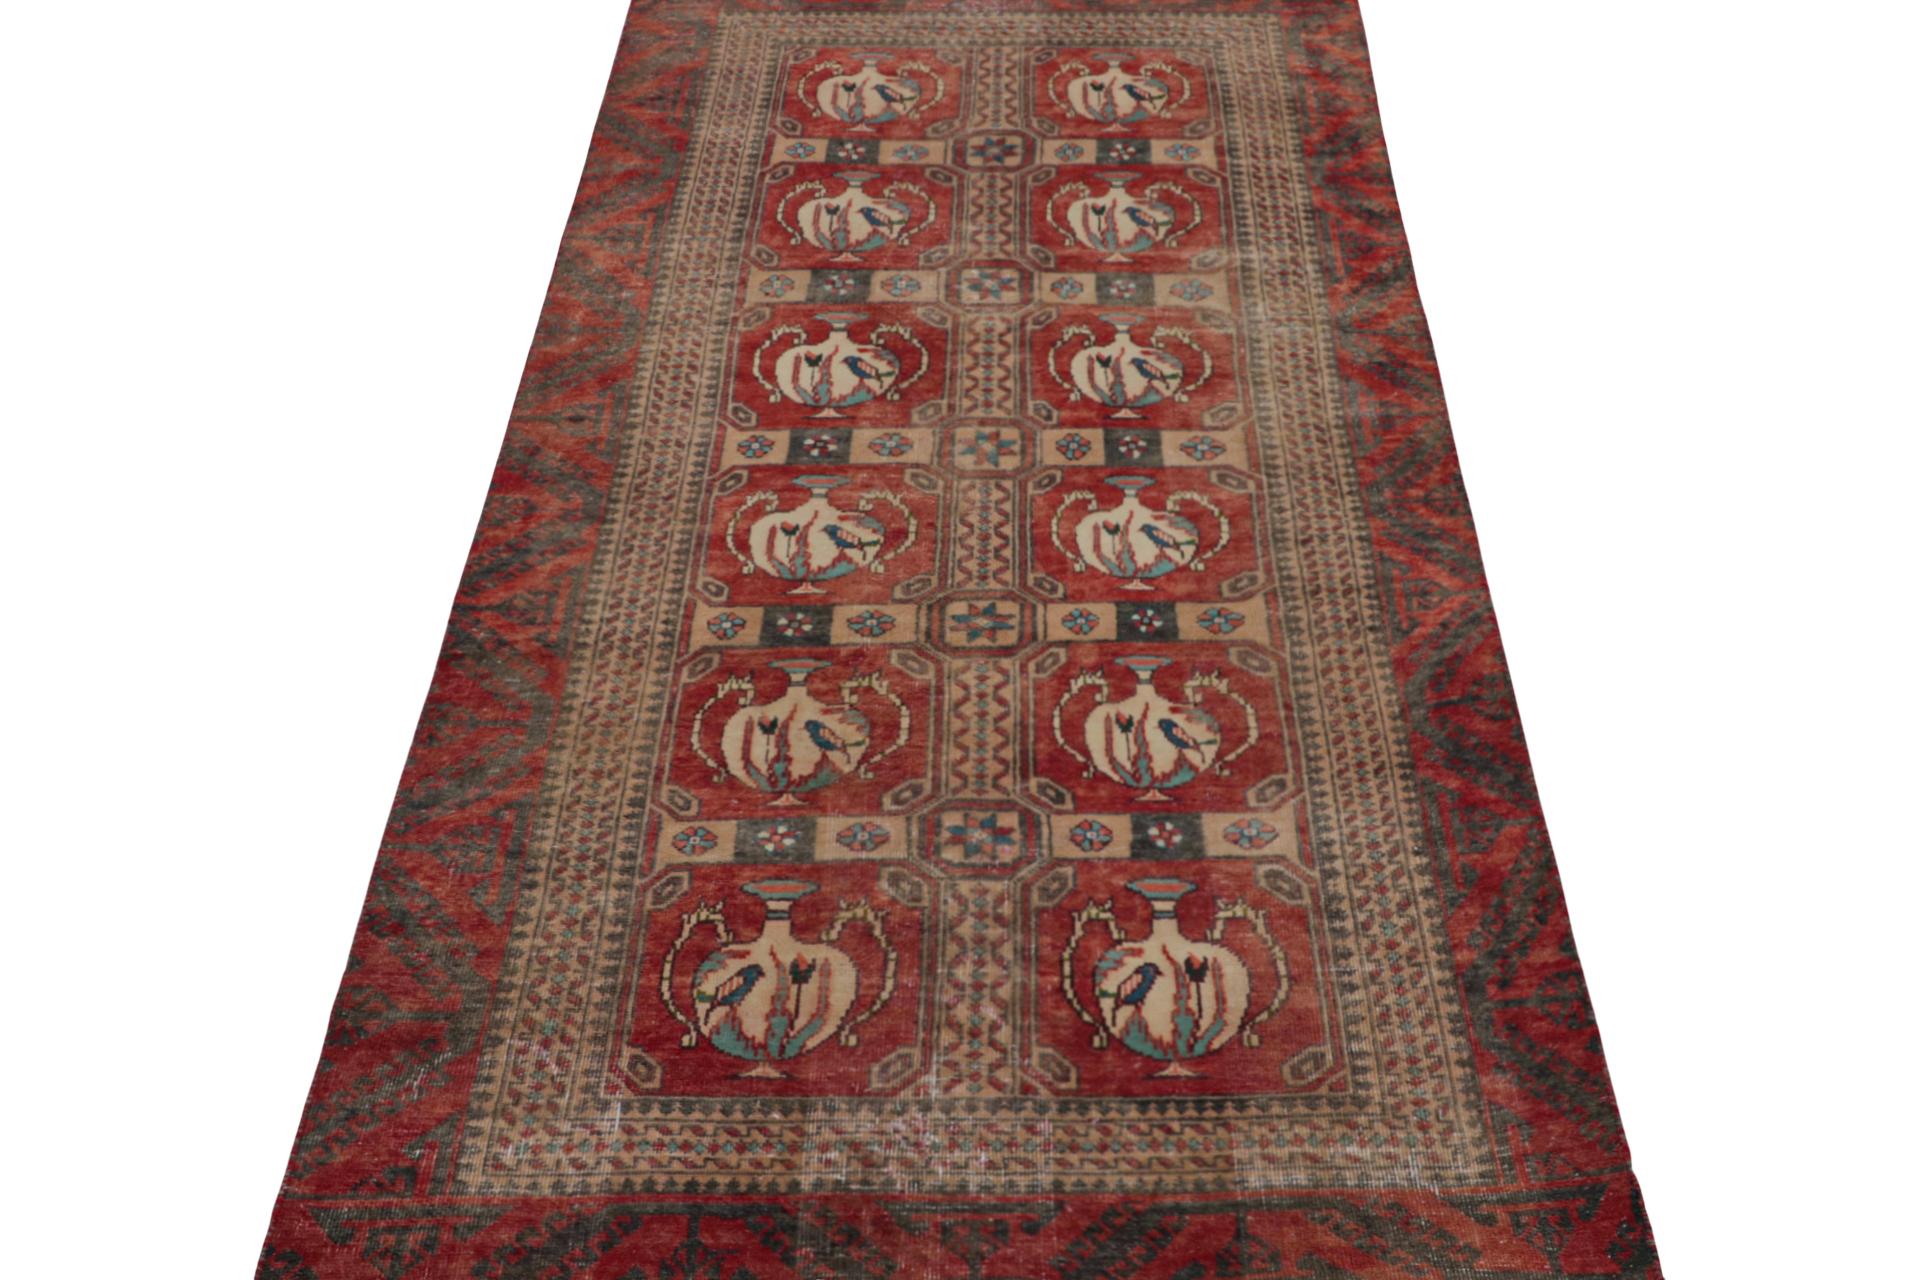 Tribal Vintage Persian Shiraz runner rug in Red, Beige & Blue Pictorial Patterns For Sale